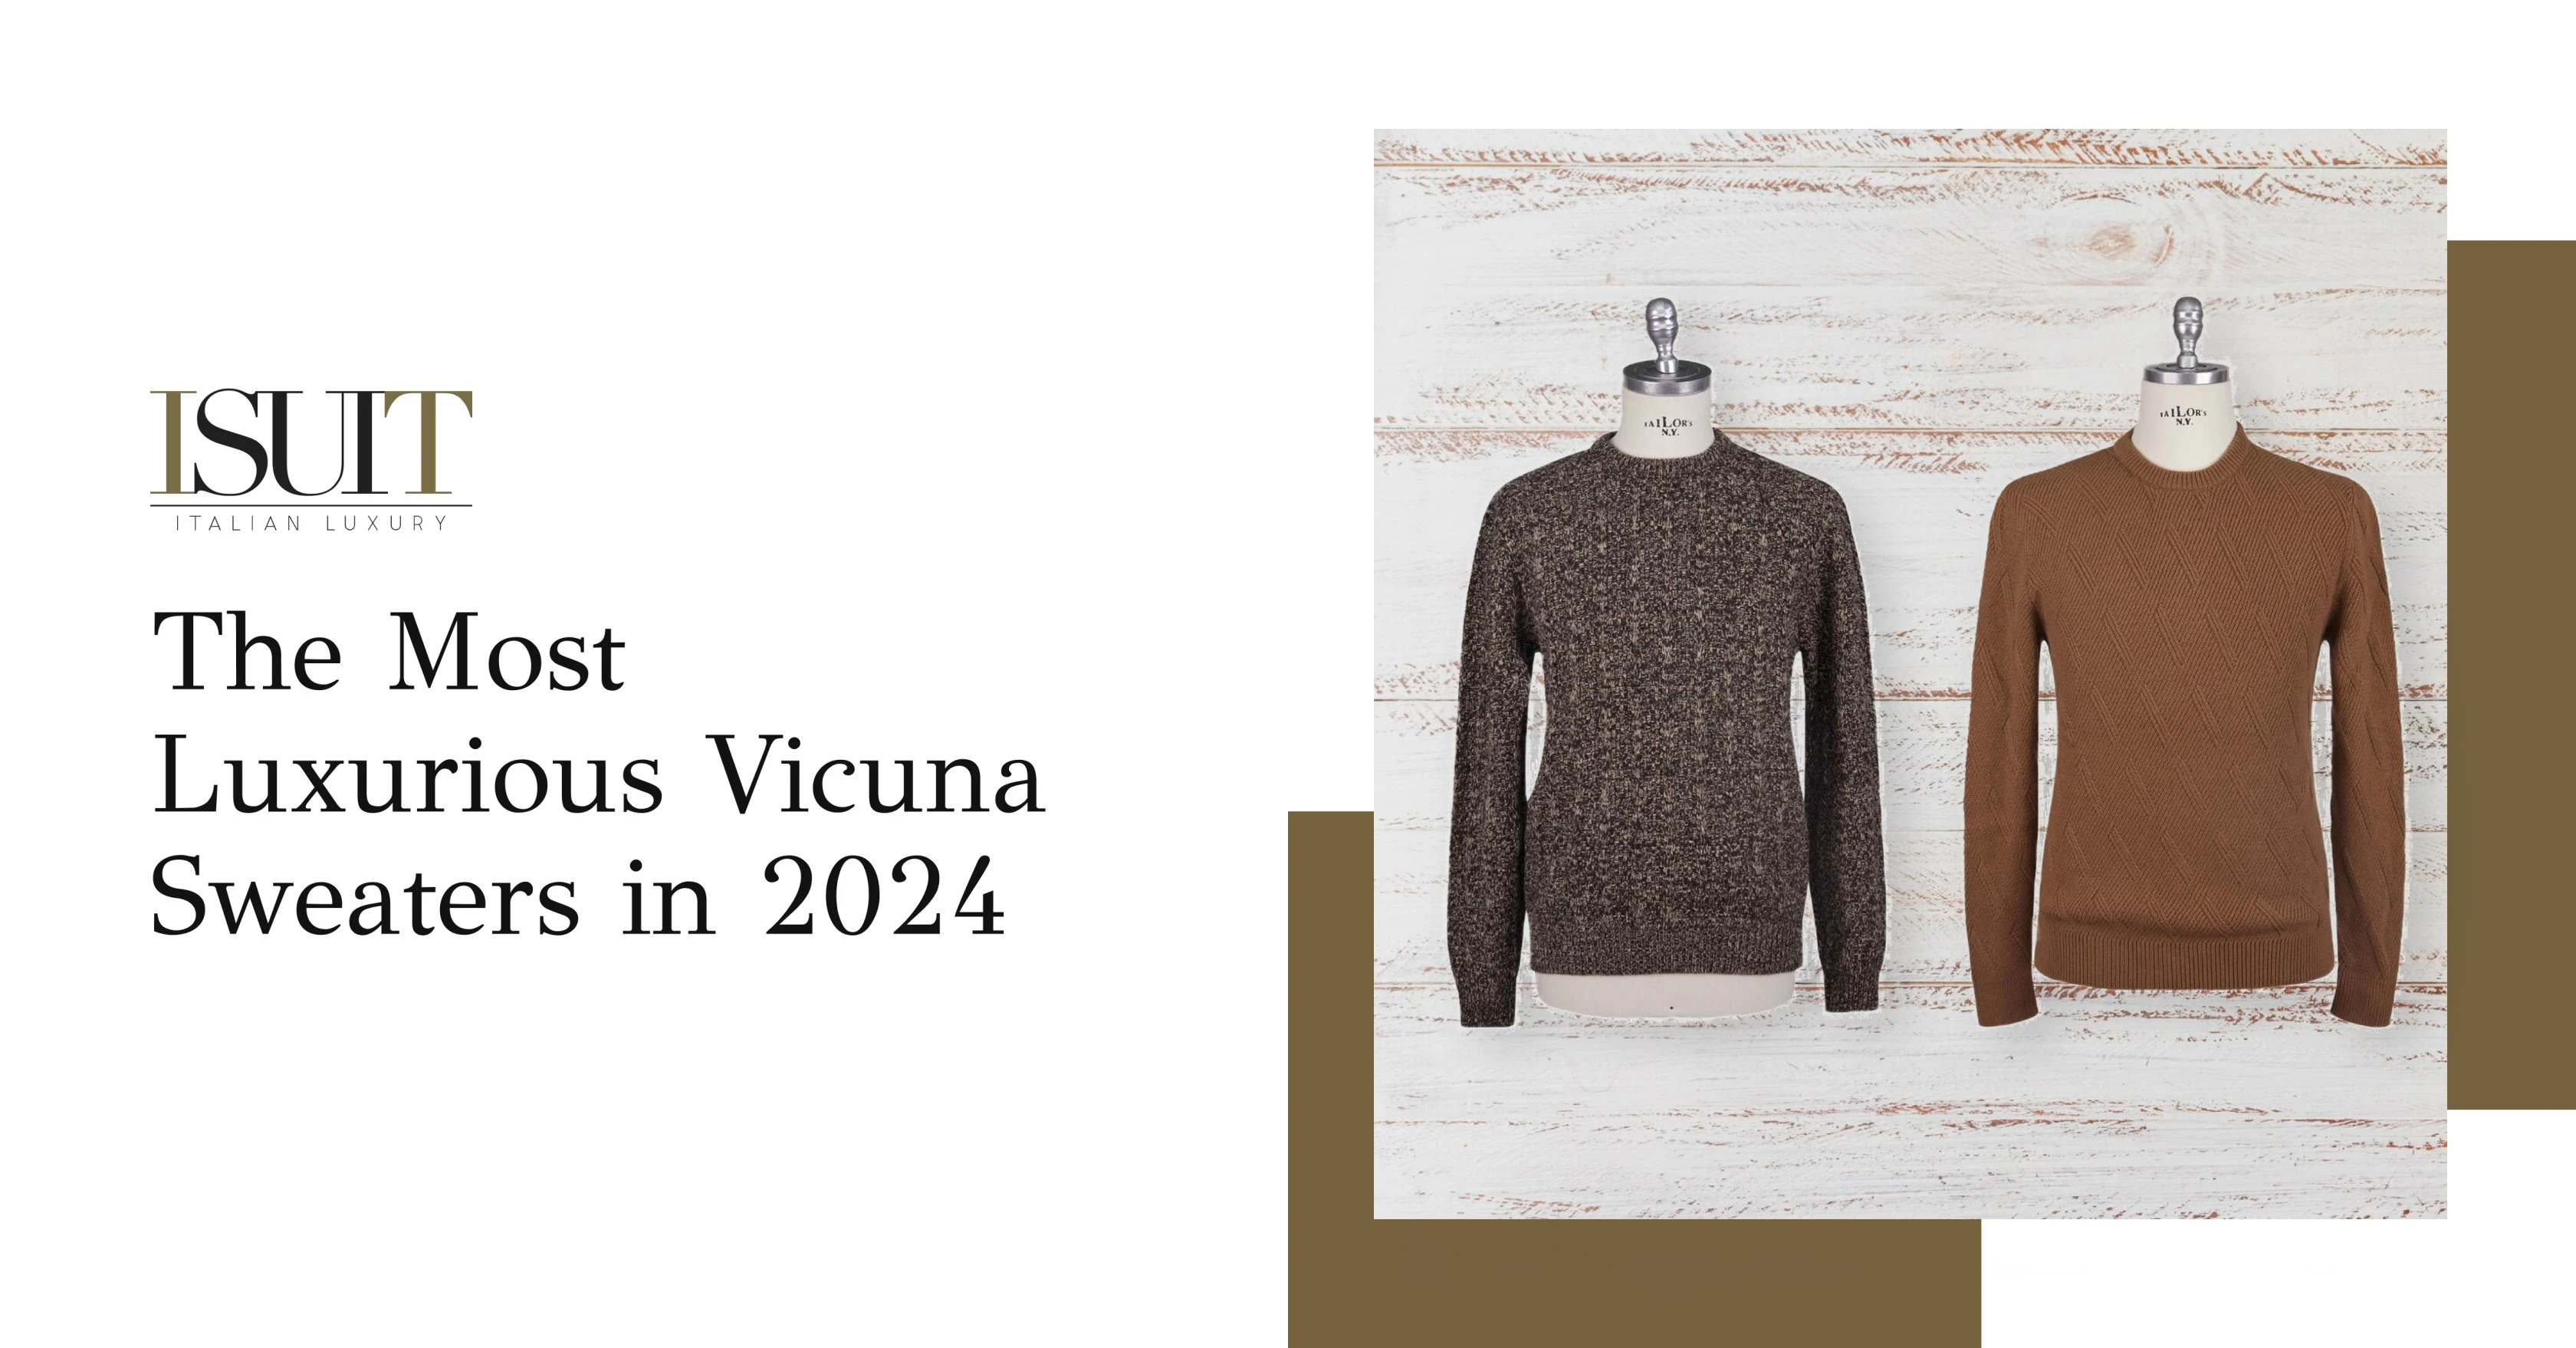 The Most Luxurious Vicuna Sweaters in 2024